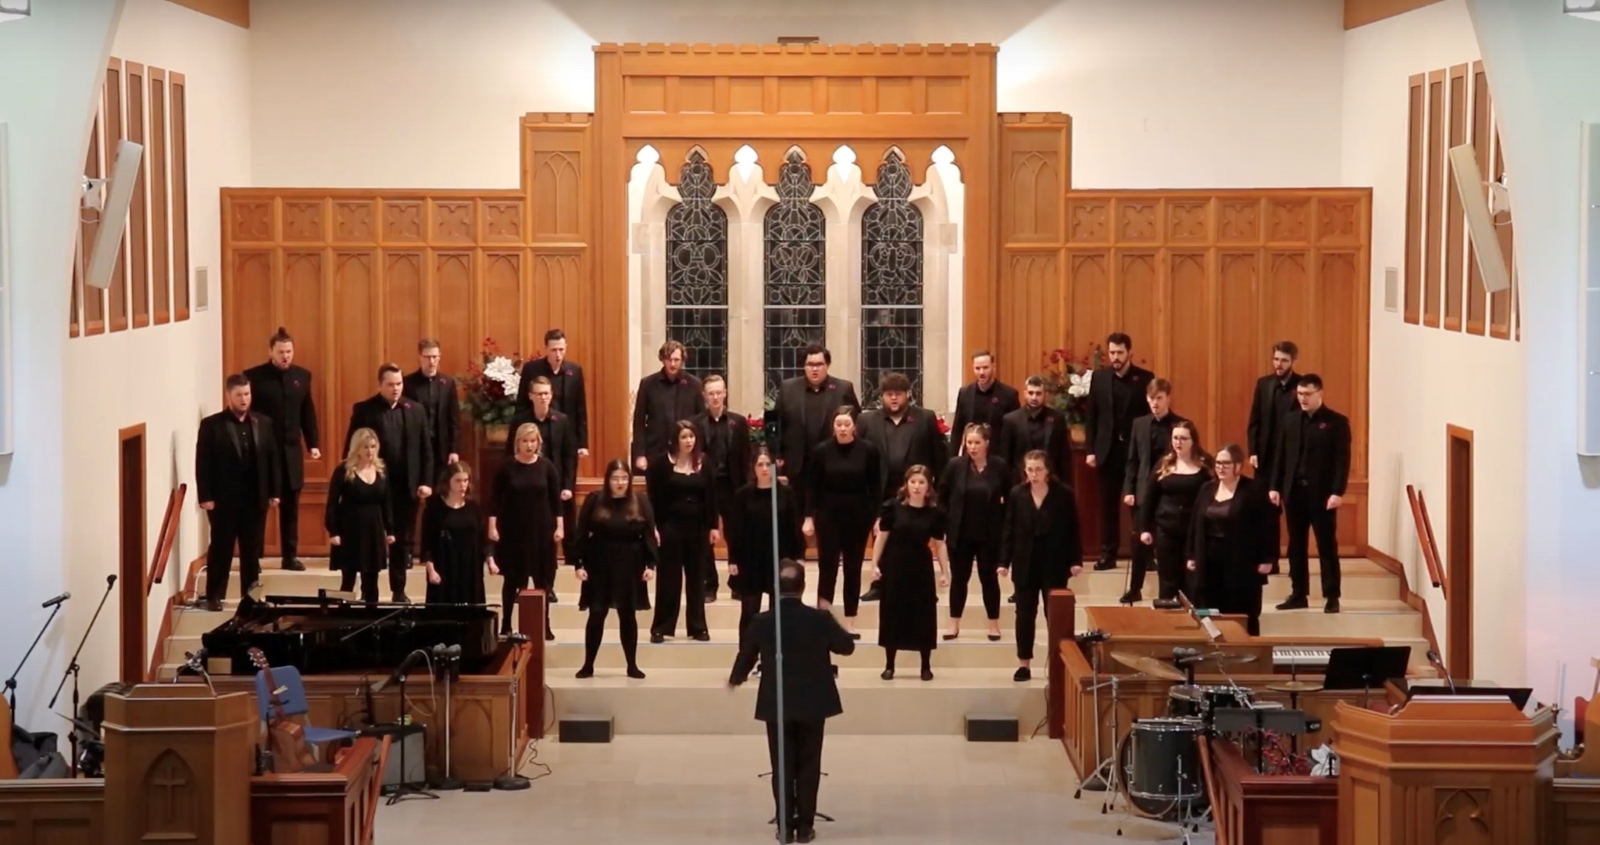 The Queen City Chorale performs at University Heights Baptist Church in Springfield, Missouri